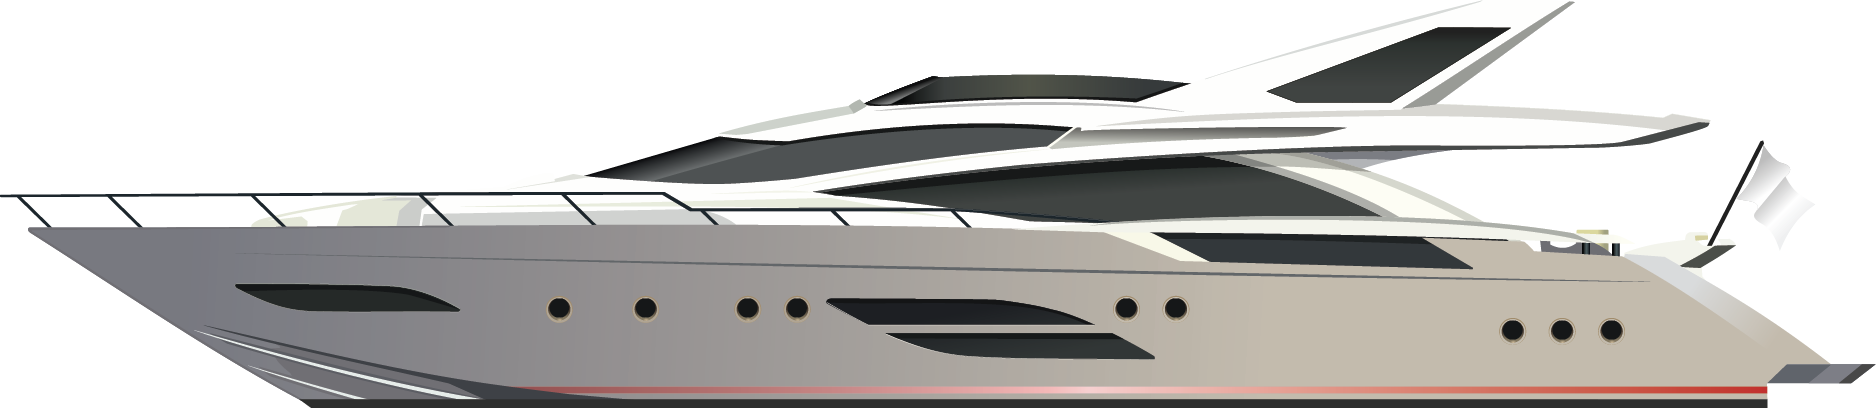 Download PNG image - Yacht PNG Free Image 